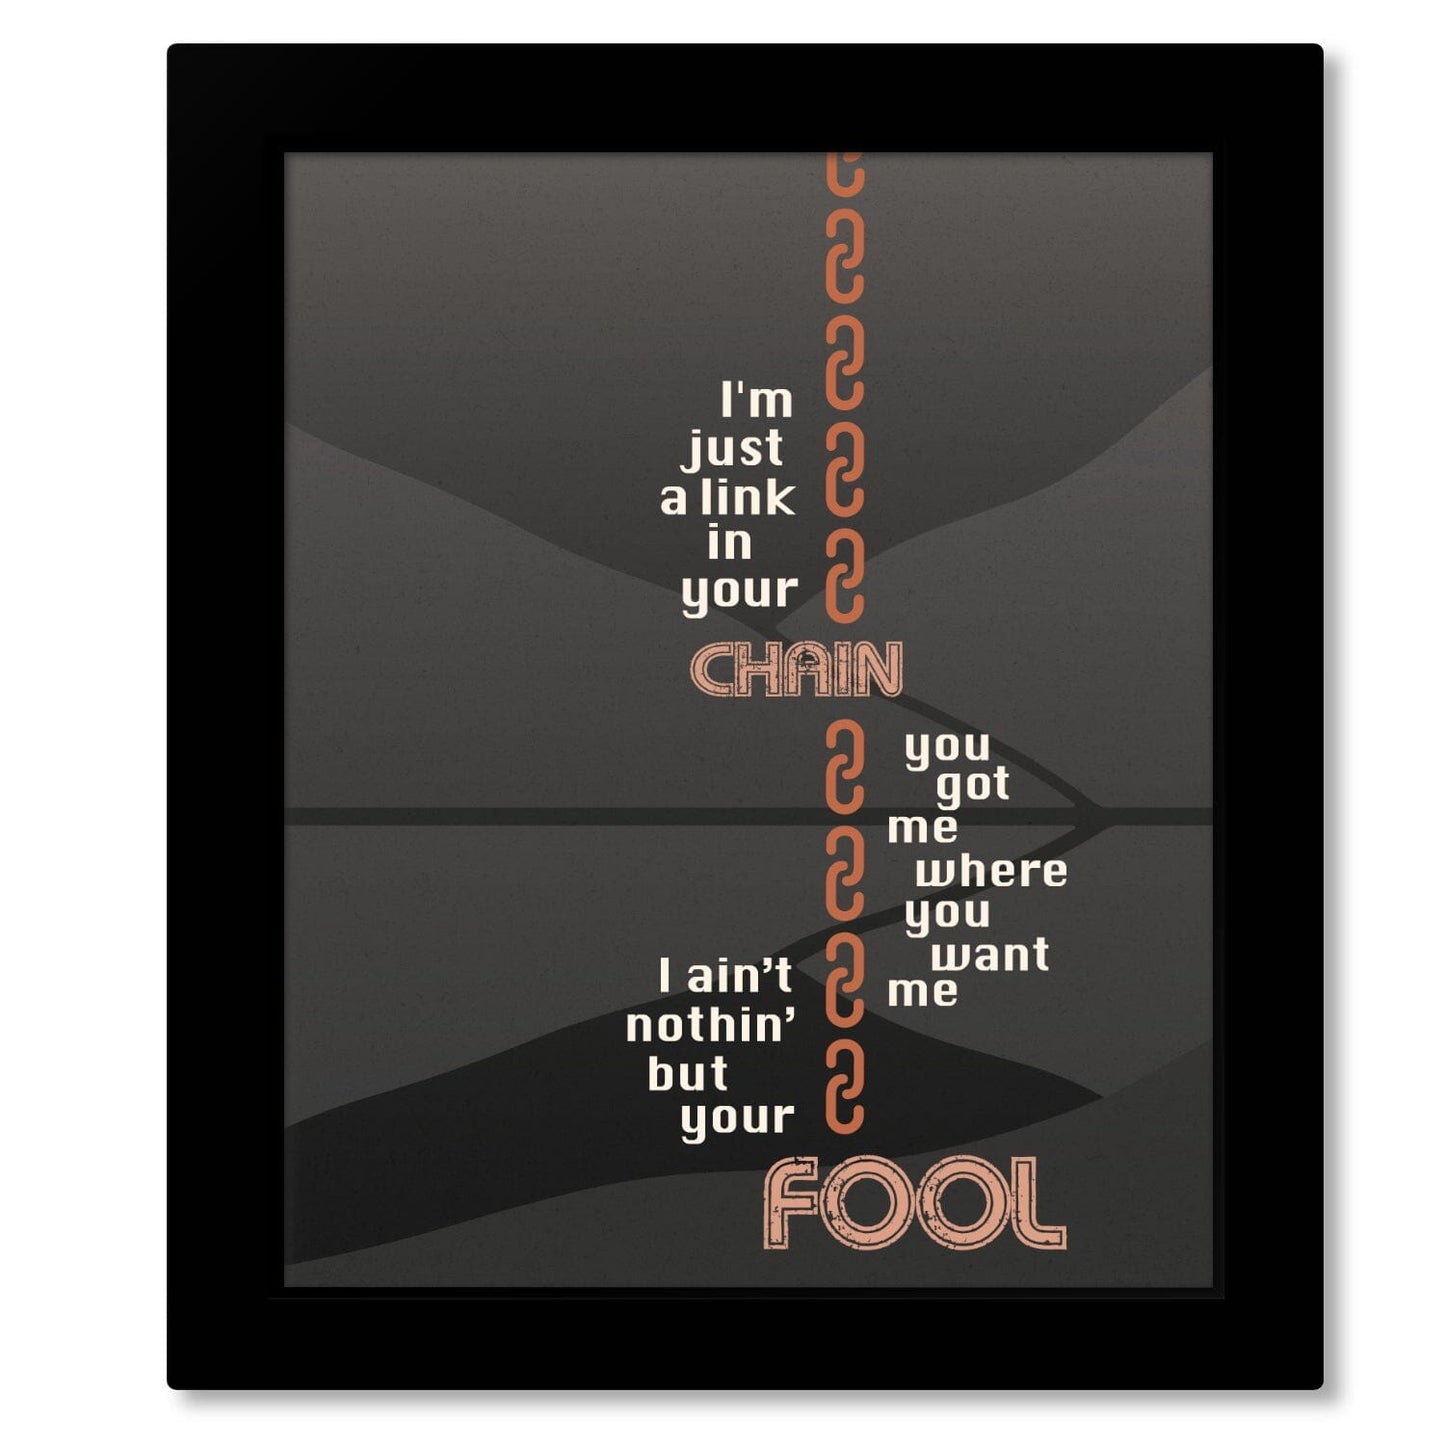 Chain of Fools by Aretha Franklin - Motown Music Lyric Art Song Lyrics Art Song Lyrics Art 8x10 Framed Print (without mat) 